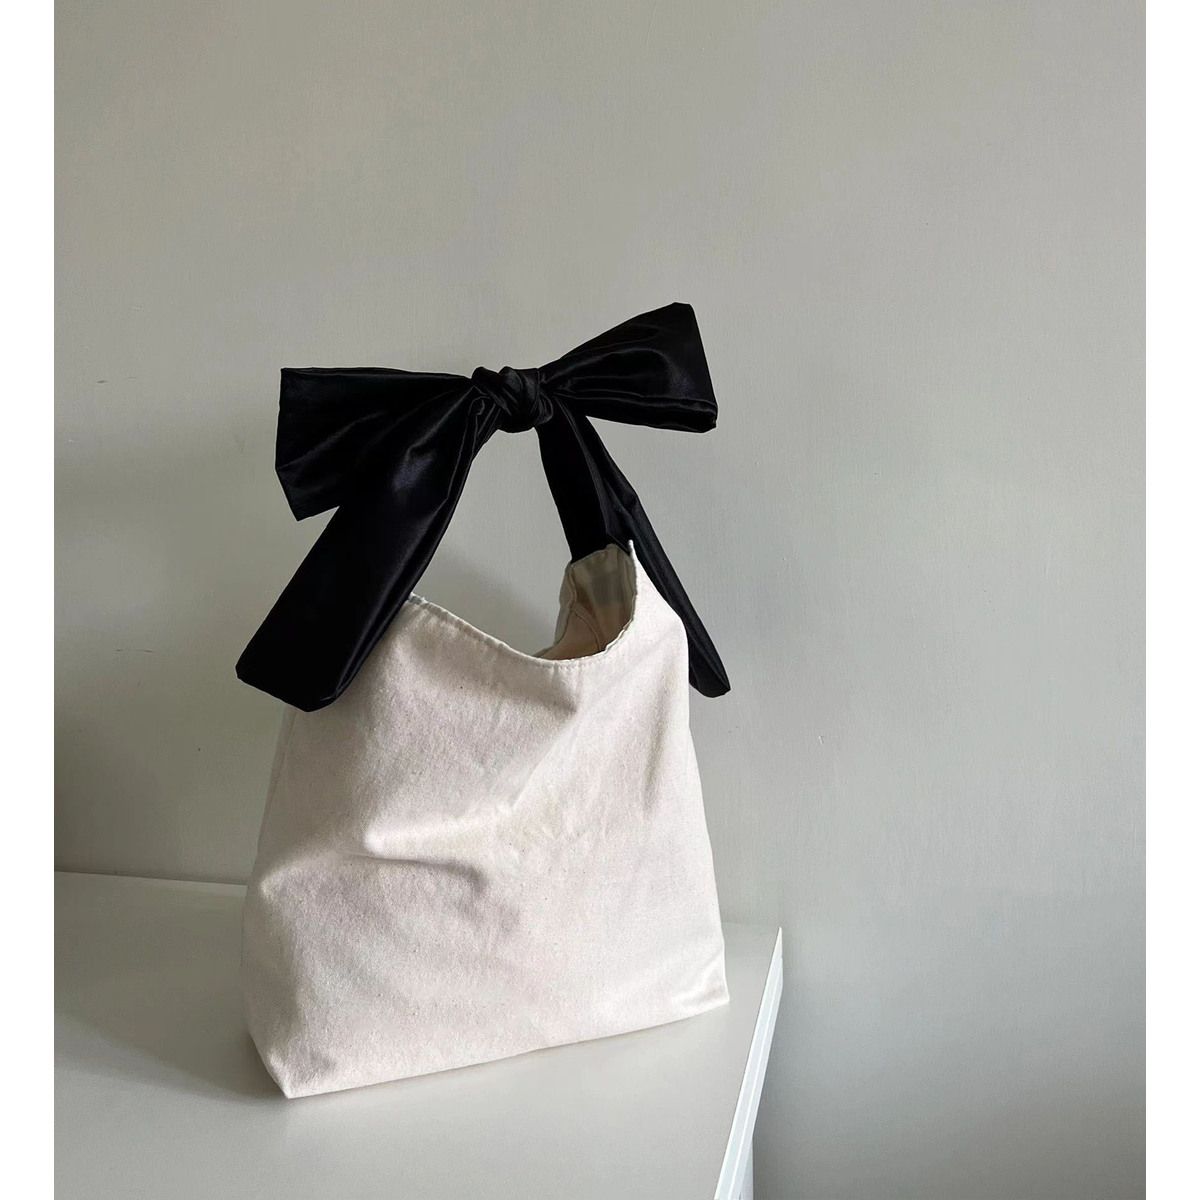 Early Autumn Girls' Bow Tie Bag 2023 New Cute Solid Color Handbag Contrast Color Versatile European and American Underarm Bag for Women